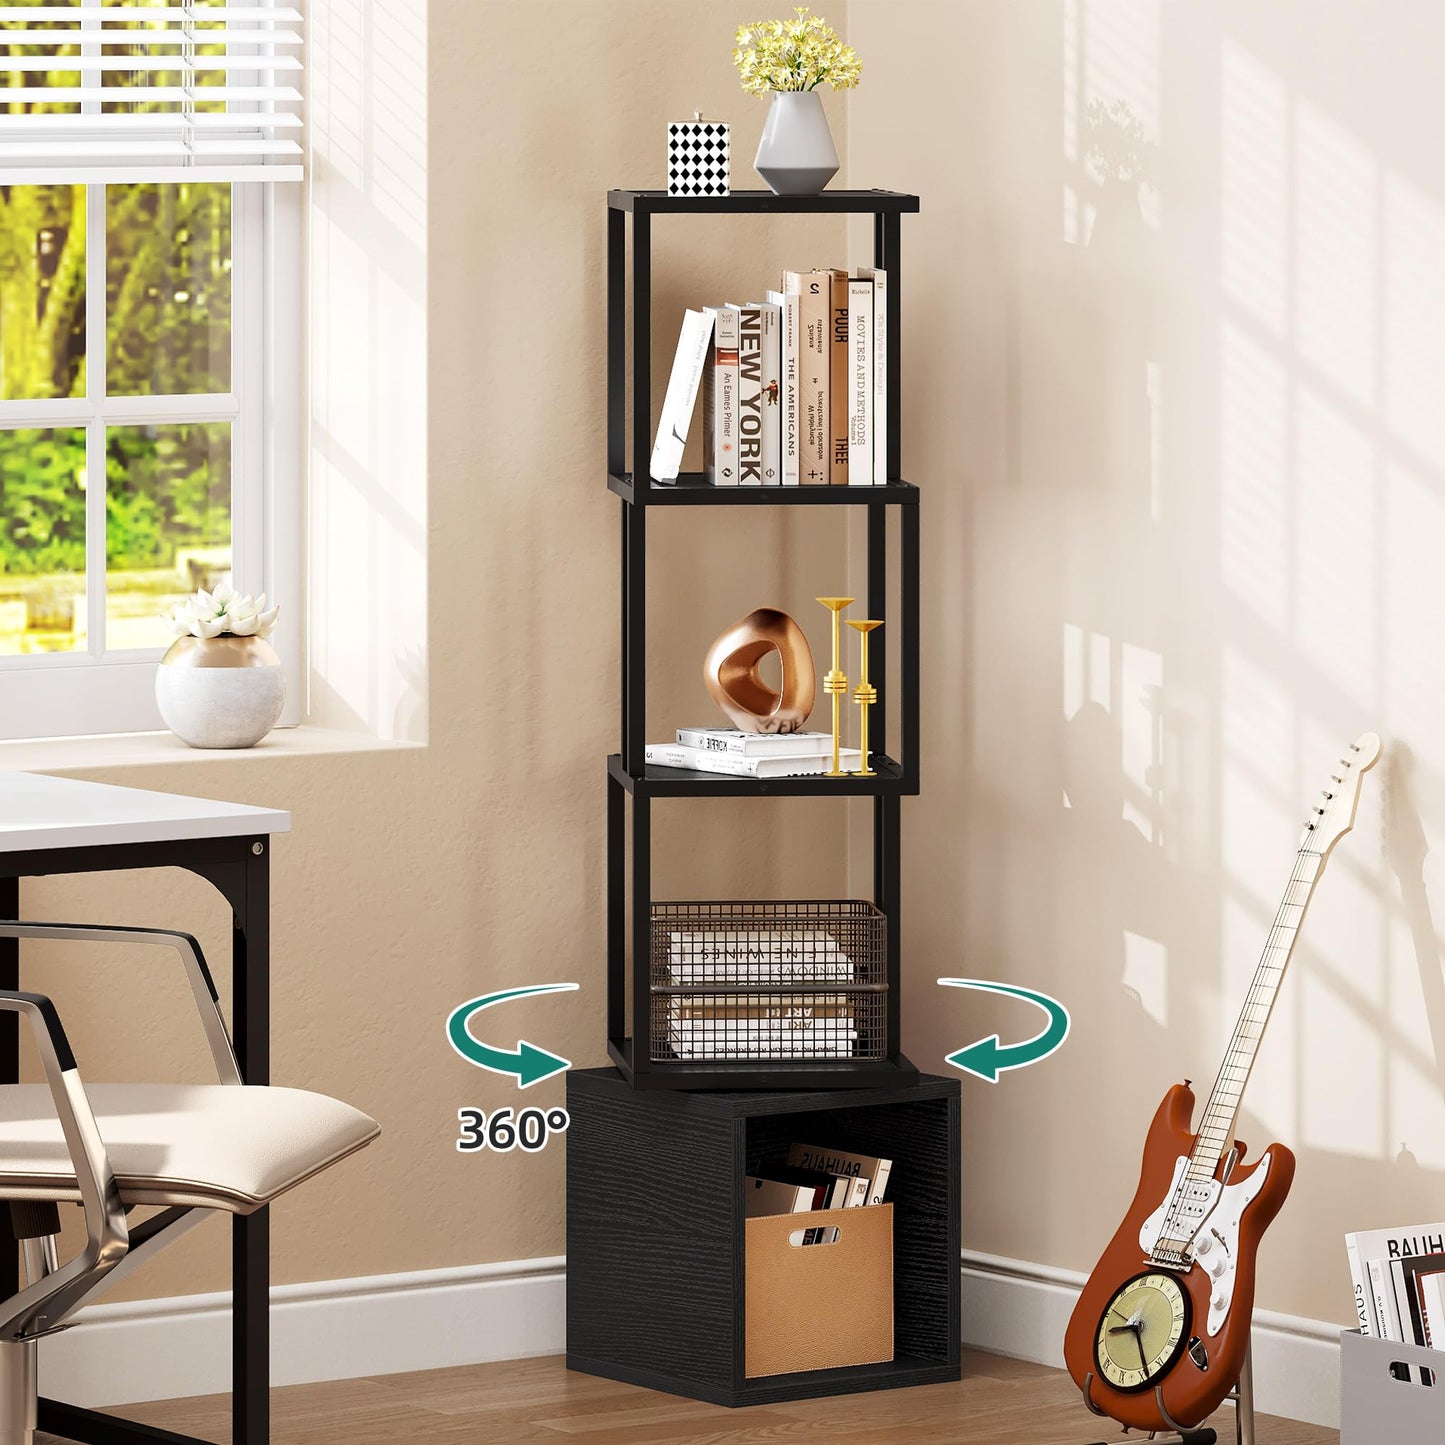 YITAHOME 4-Tier Rotating Bookshelf 360 Display Floor Standing Bookcase for Small Spaces Industrial Narrow Shelf Organizer Storage Rack for Bedroom, Living Room, Study Room,Black